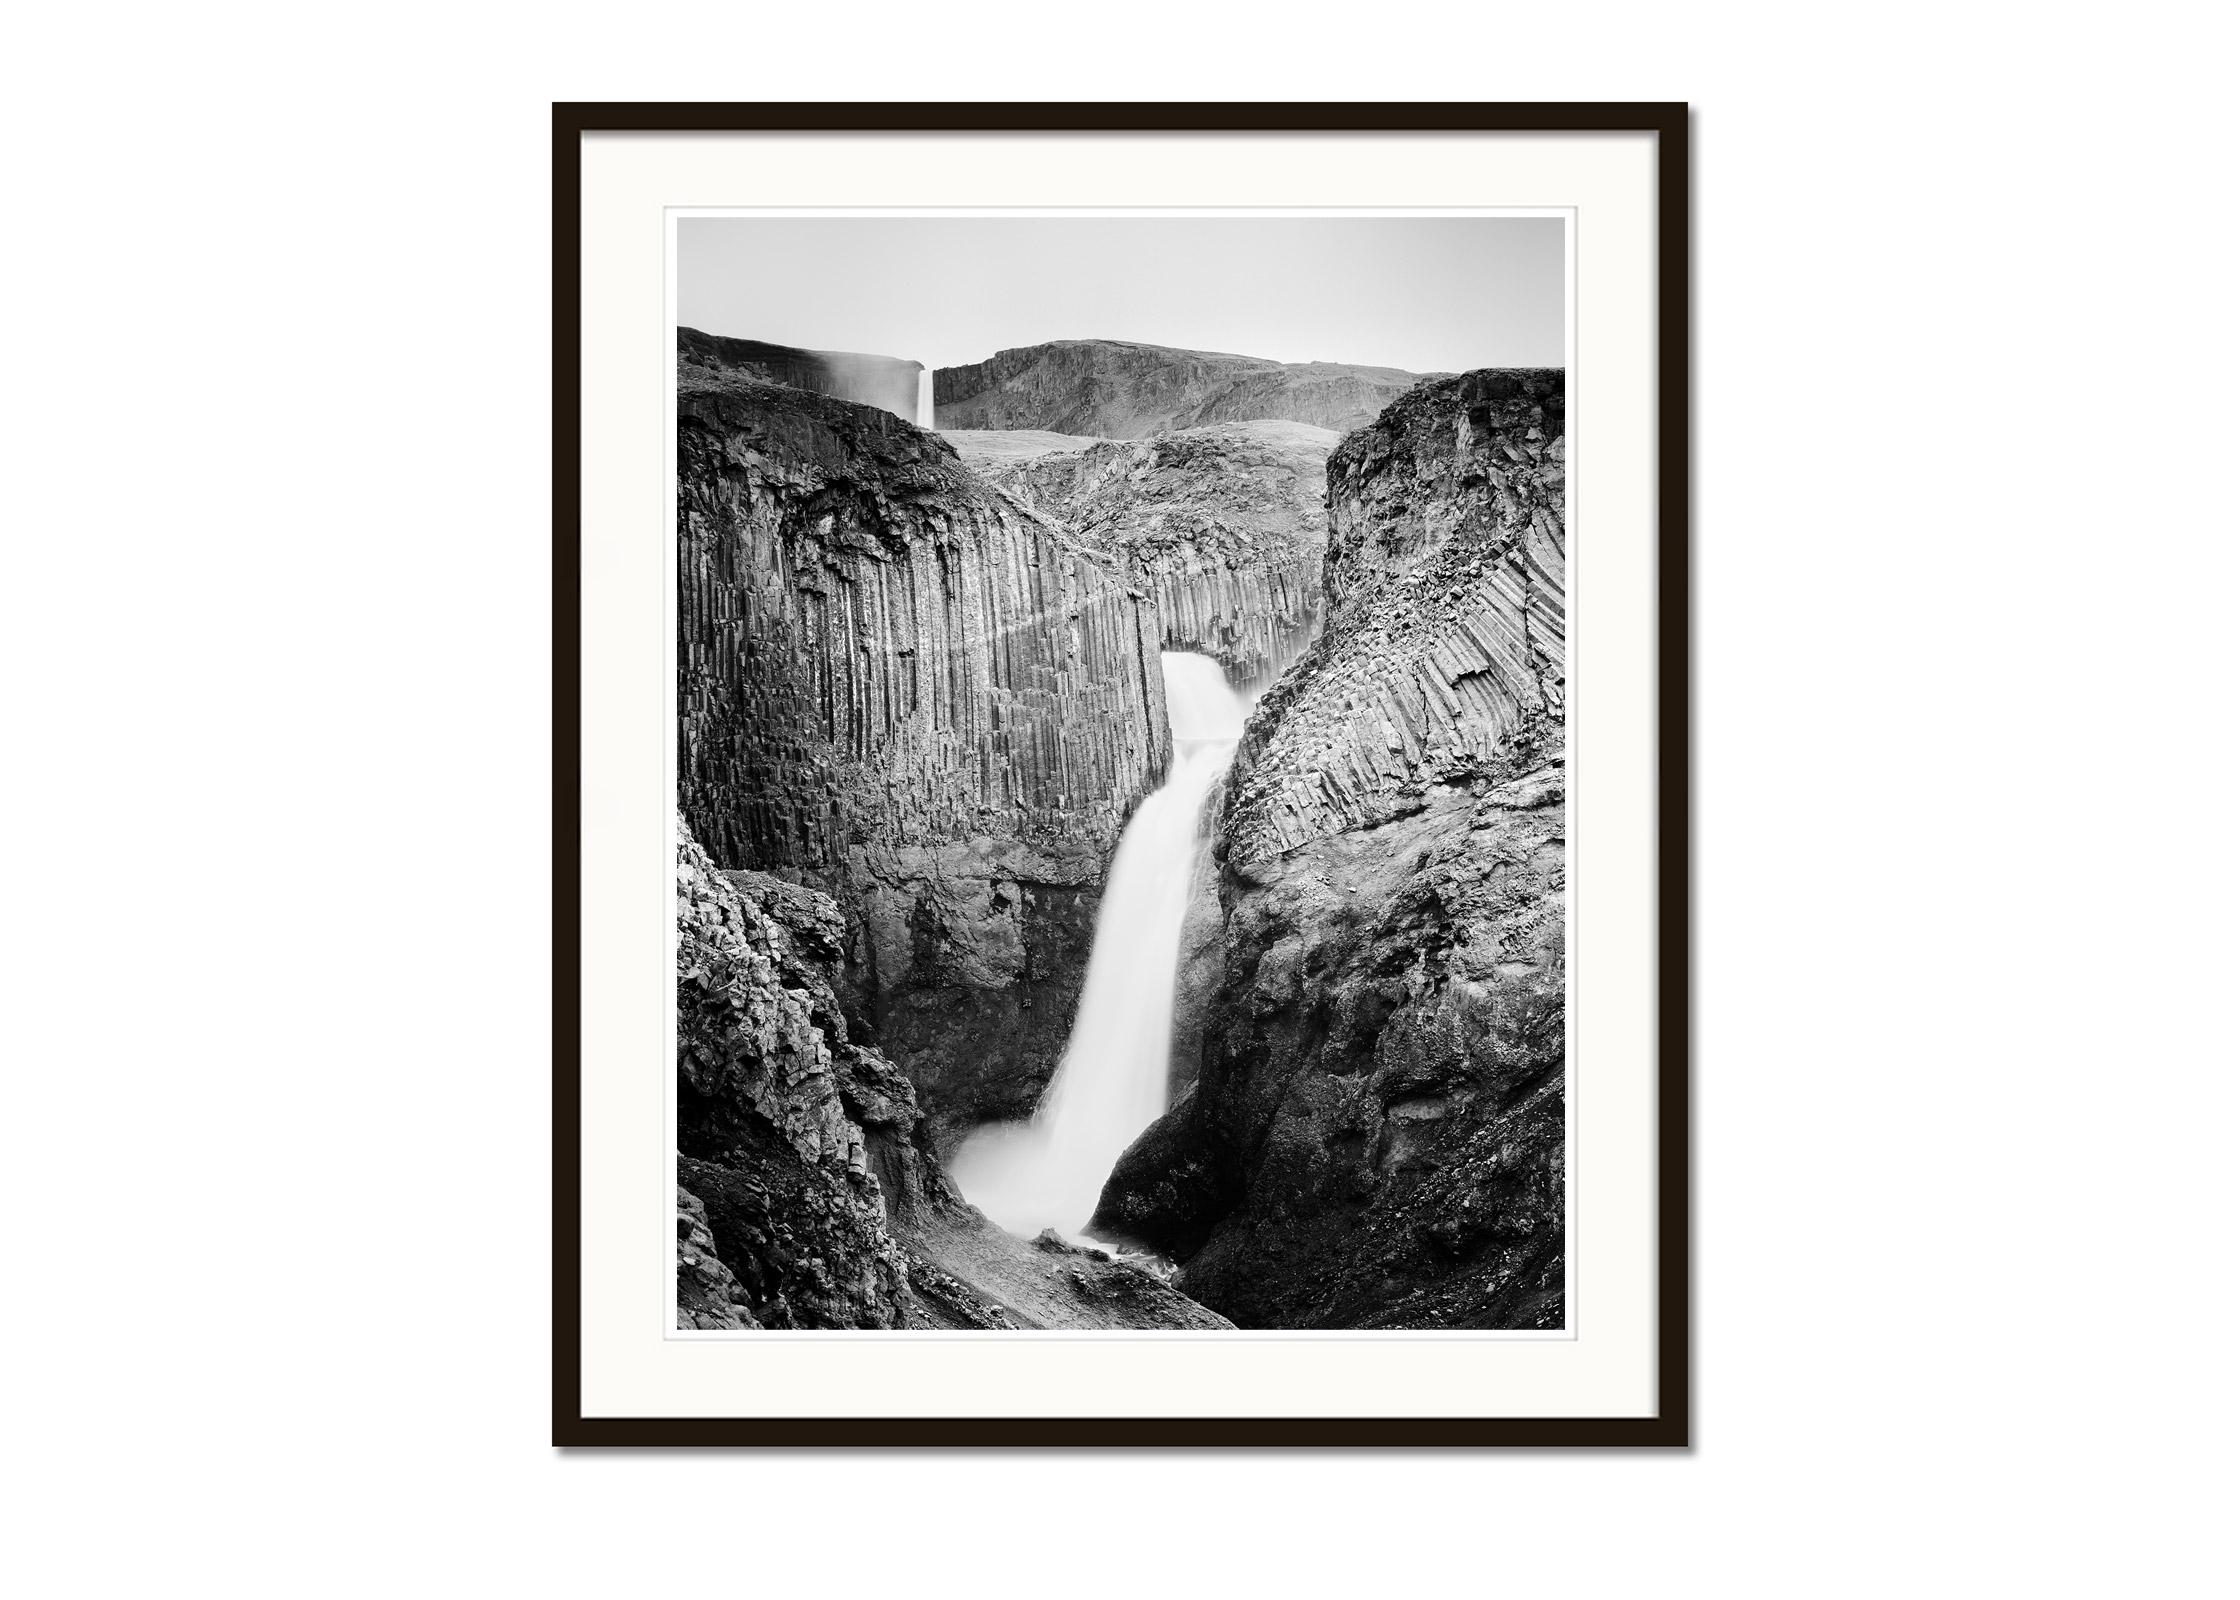 Hengifoss, Waterfall, Iceland, black and white fine art landscape photography - Black Landscape Photograph by Gerald Berghammer